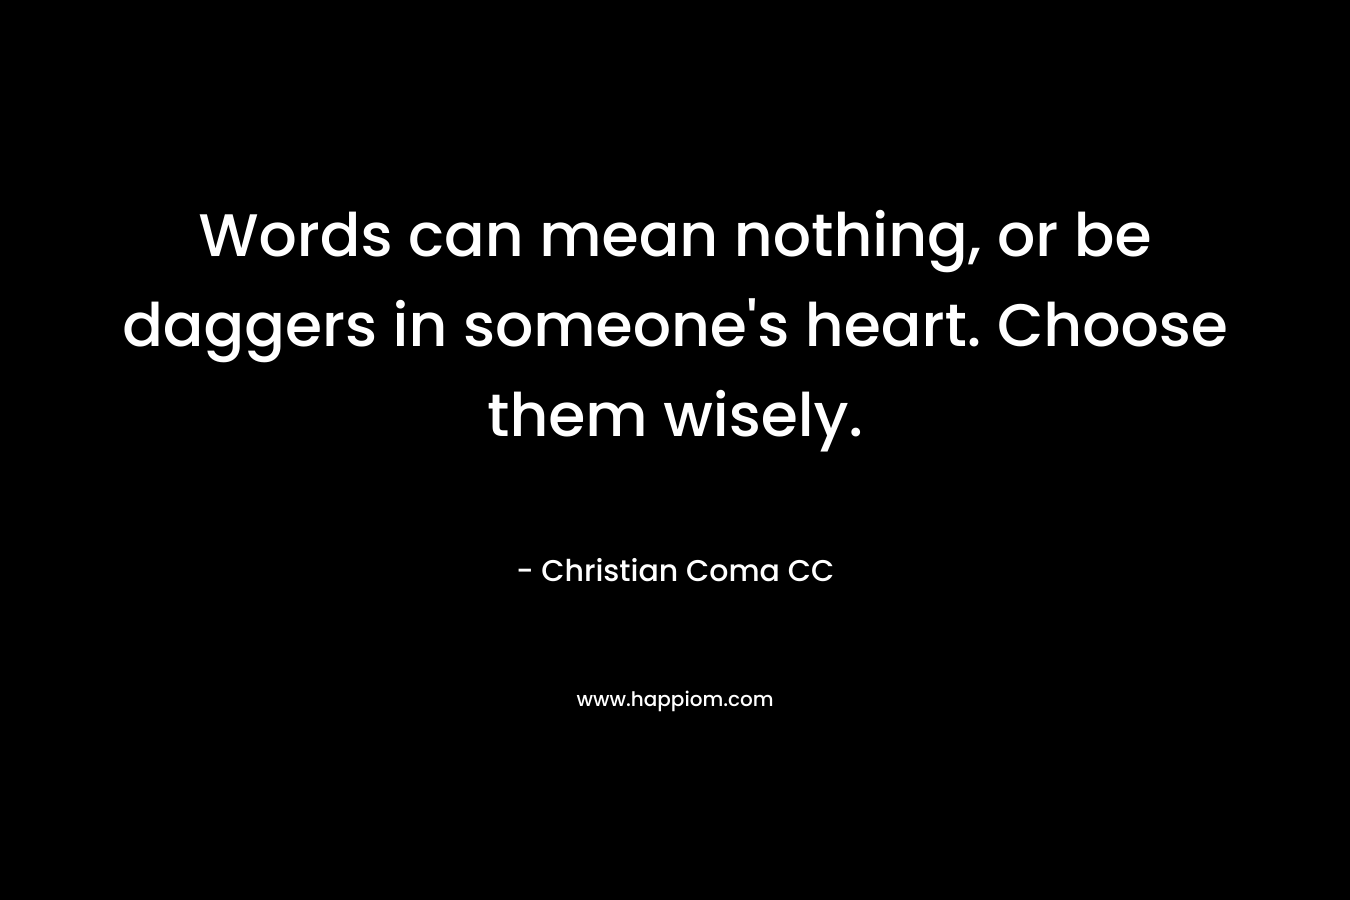 Words can mean nothing, or be daggers in someone's heart. Choose them wisely.